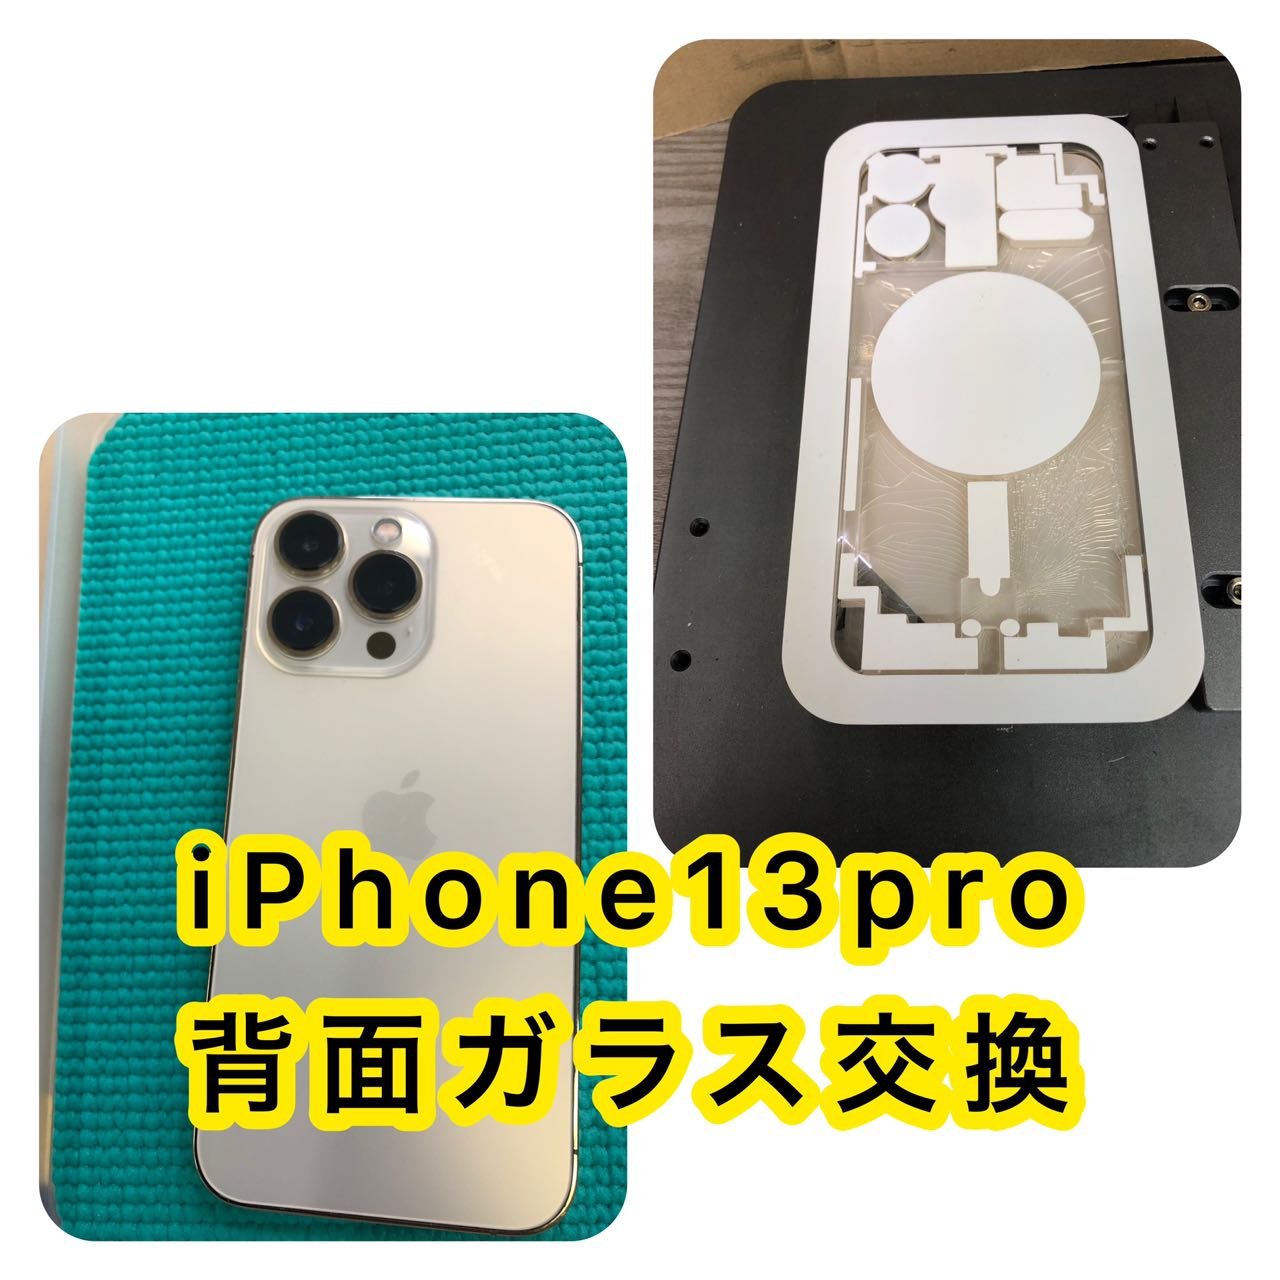 iPhone修理　高田馬場、 iPhone修理　池袋、 iPhone修理　新宿、iPhone修理　安い　高田馬場、 iPhone修理　安い　池袋、iPhone背面ガラス割れ修理 高田馬場、 iPhone背面ガラス割れ修理 池袋、 iPhone背面ガラス割れ修理 新宿、 iPhone背面ガラス割れ修理 新大久保、 iPhone背面ガラス割れ修理 大久保、 iPhone郵送修理、